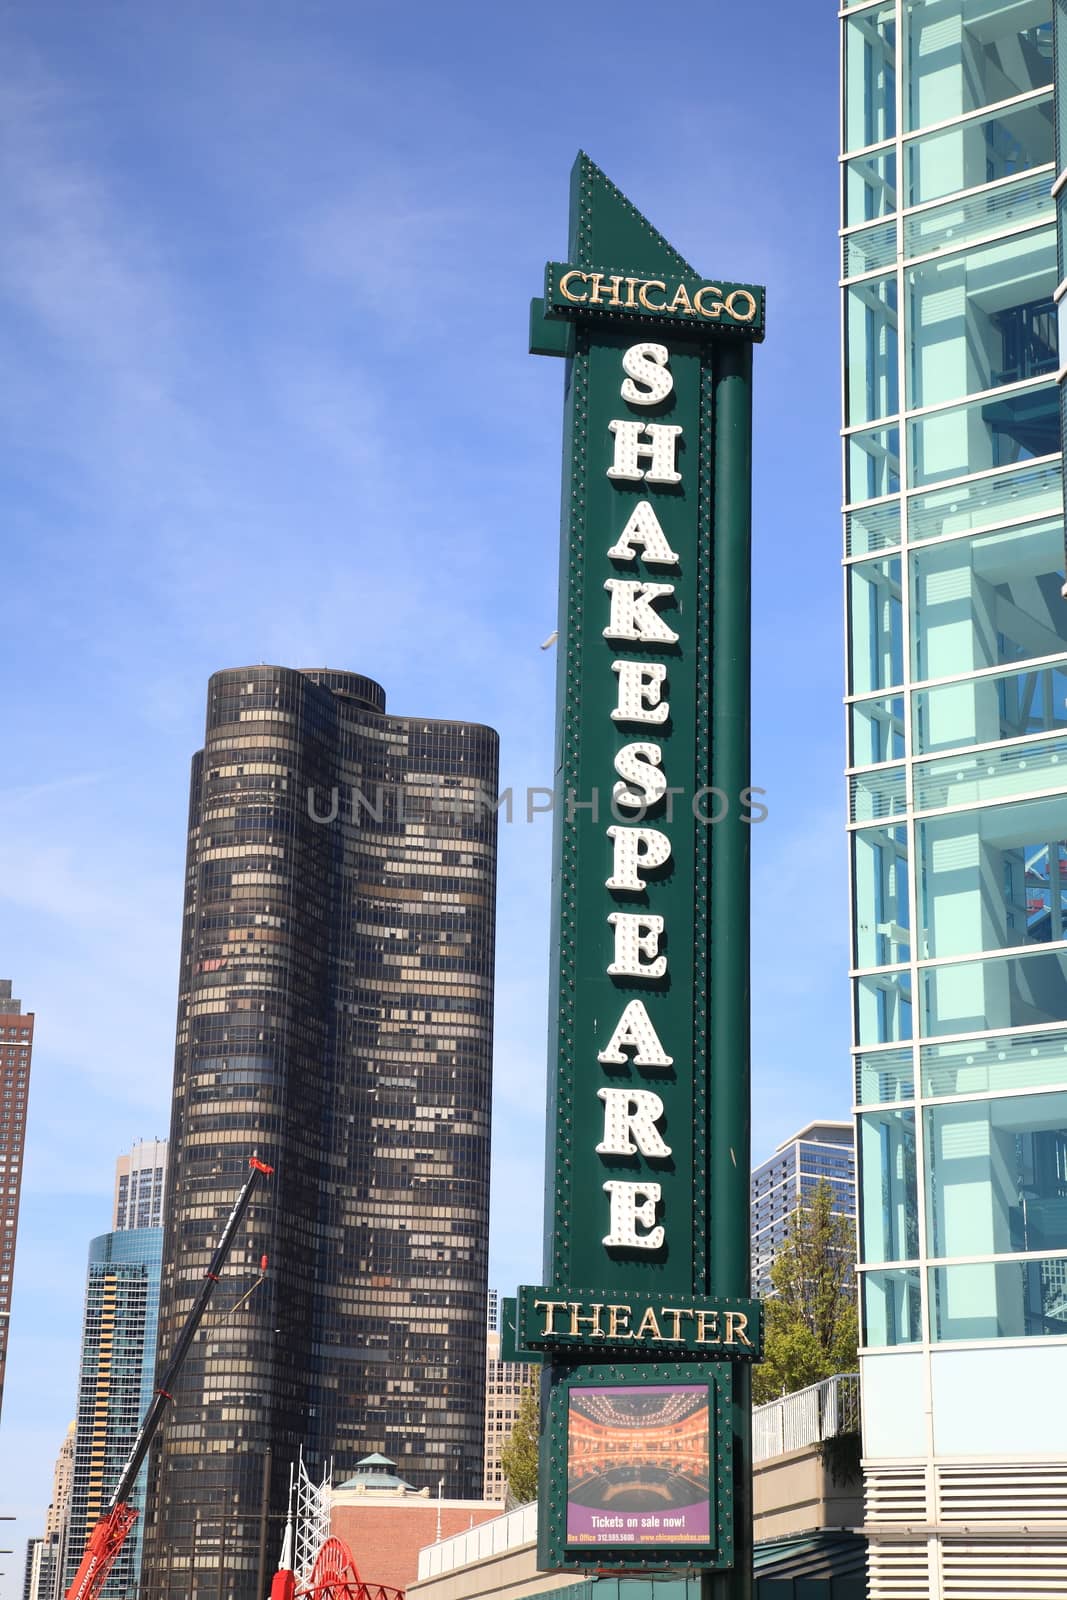 Chicago - Shakespeare Theater by Ffooter